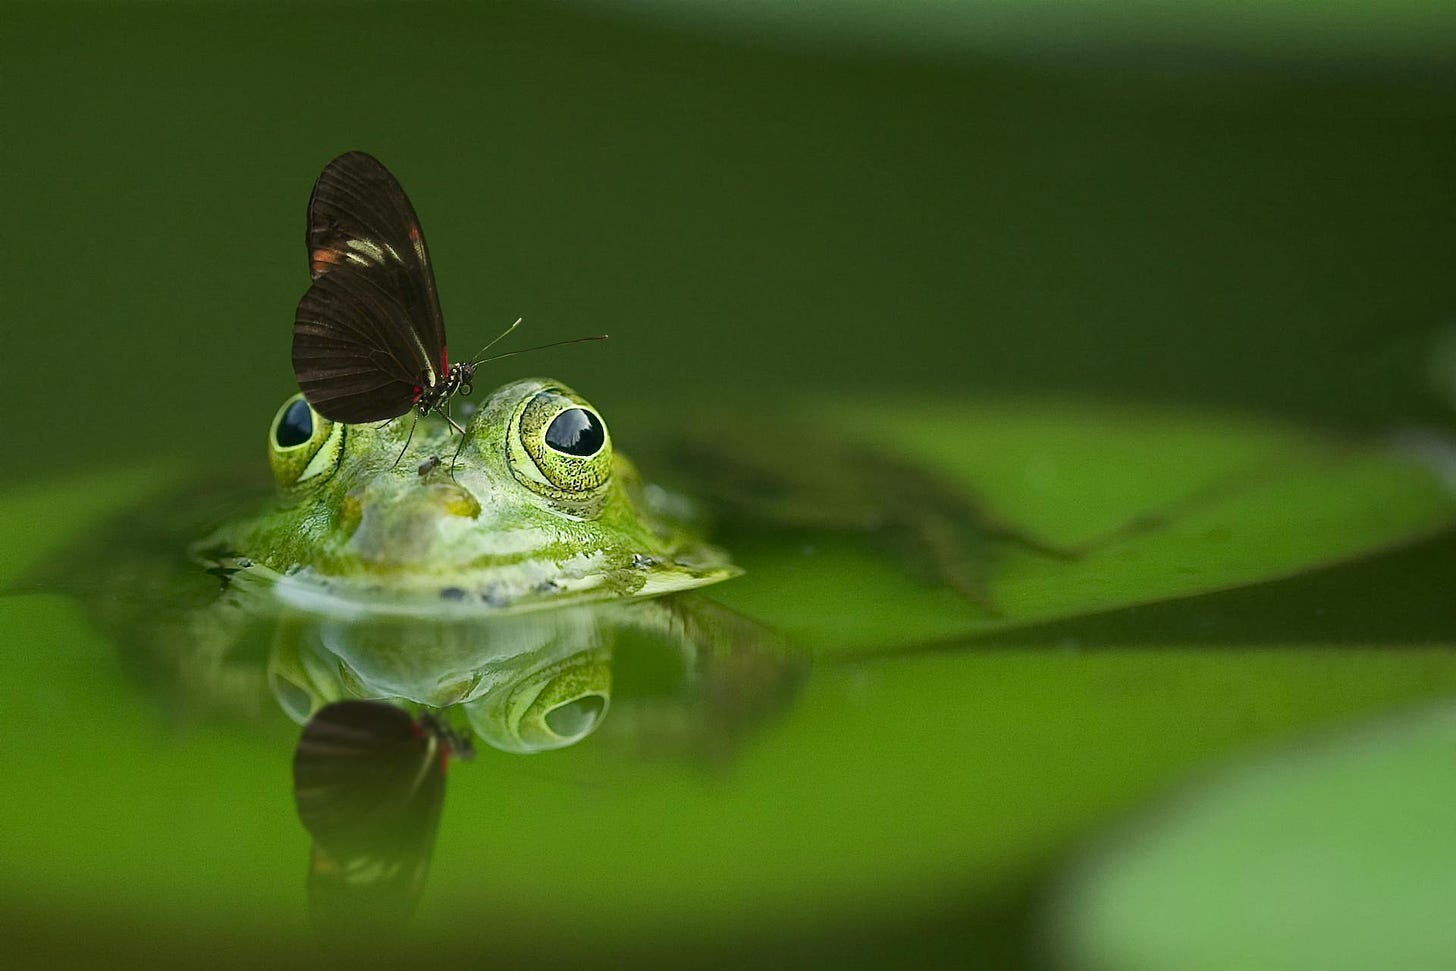 A frog with a butterfly resting on its head